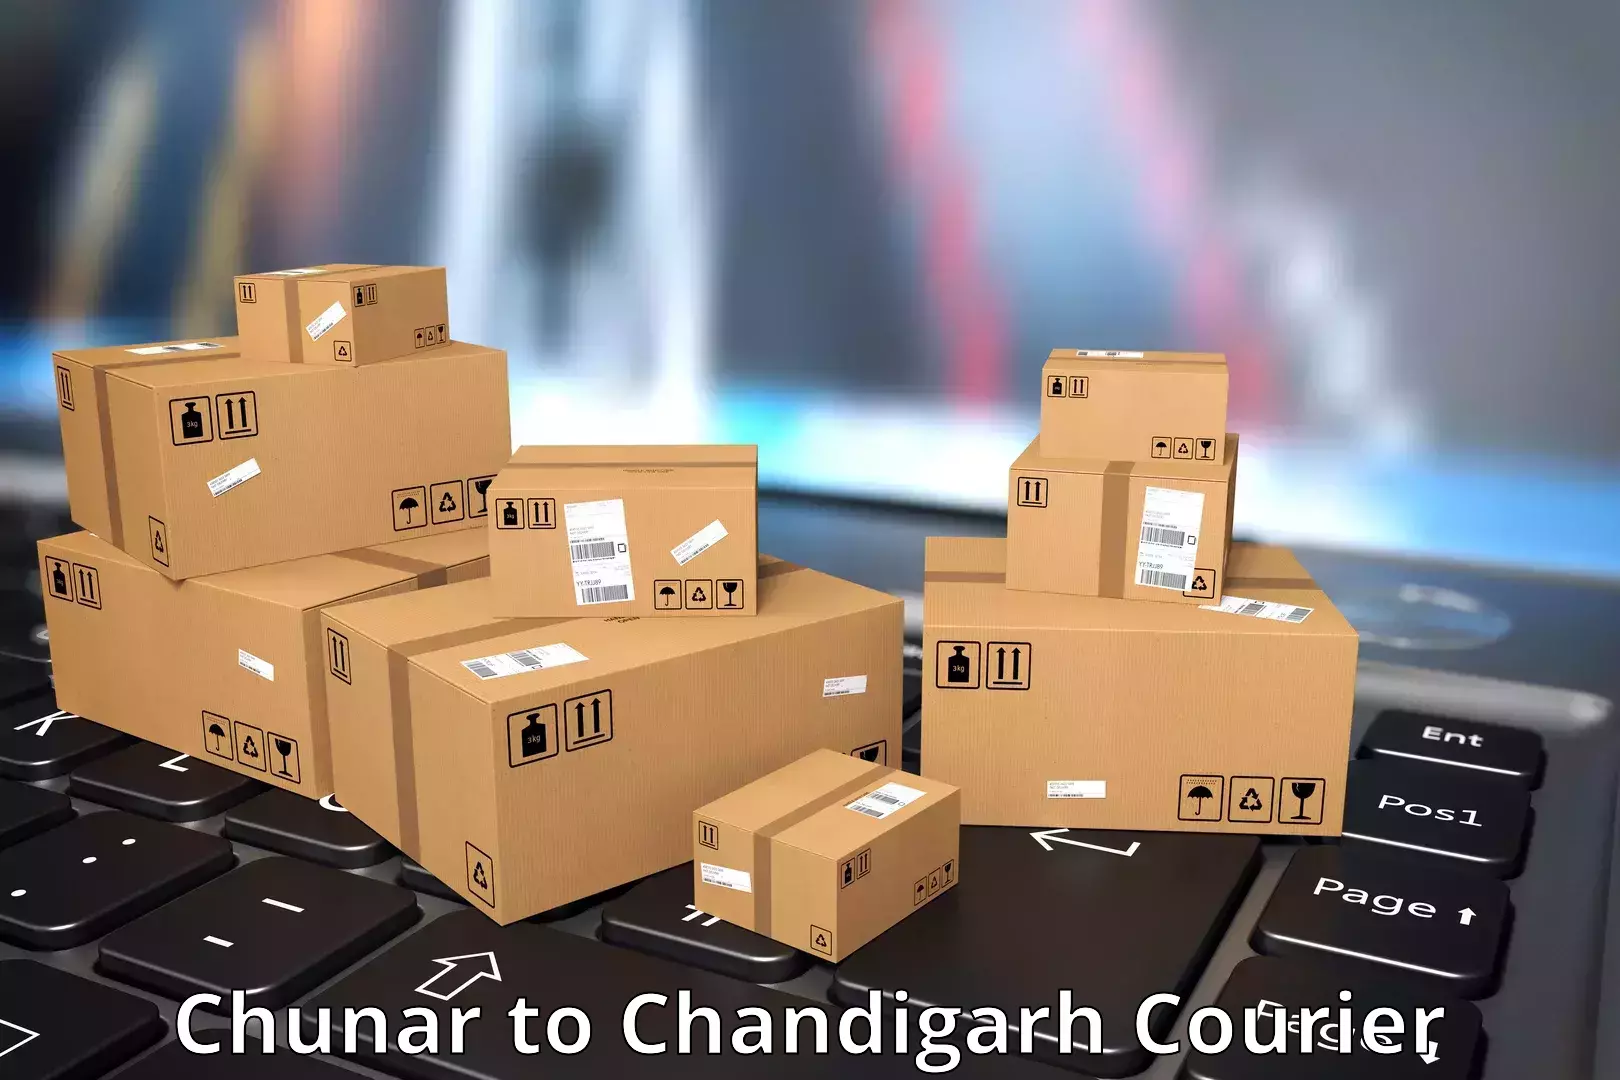 Delivery service partnership Chunar to Chandigarh